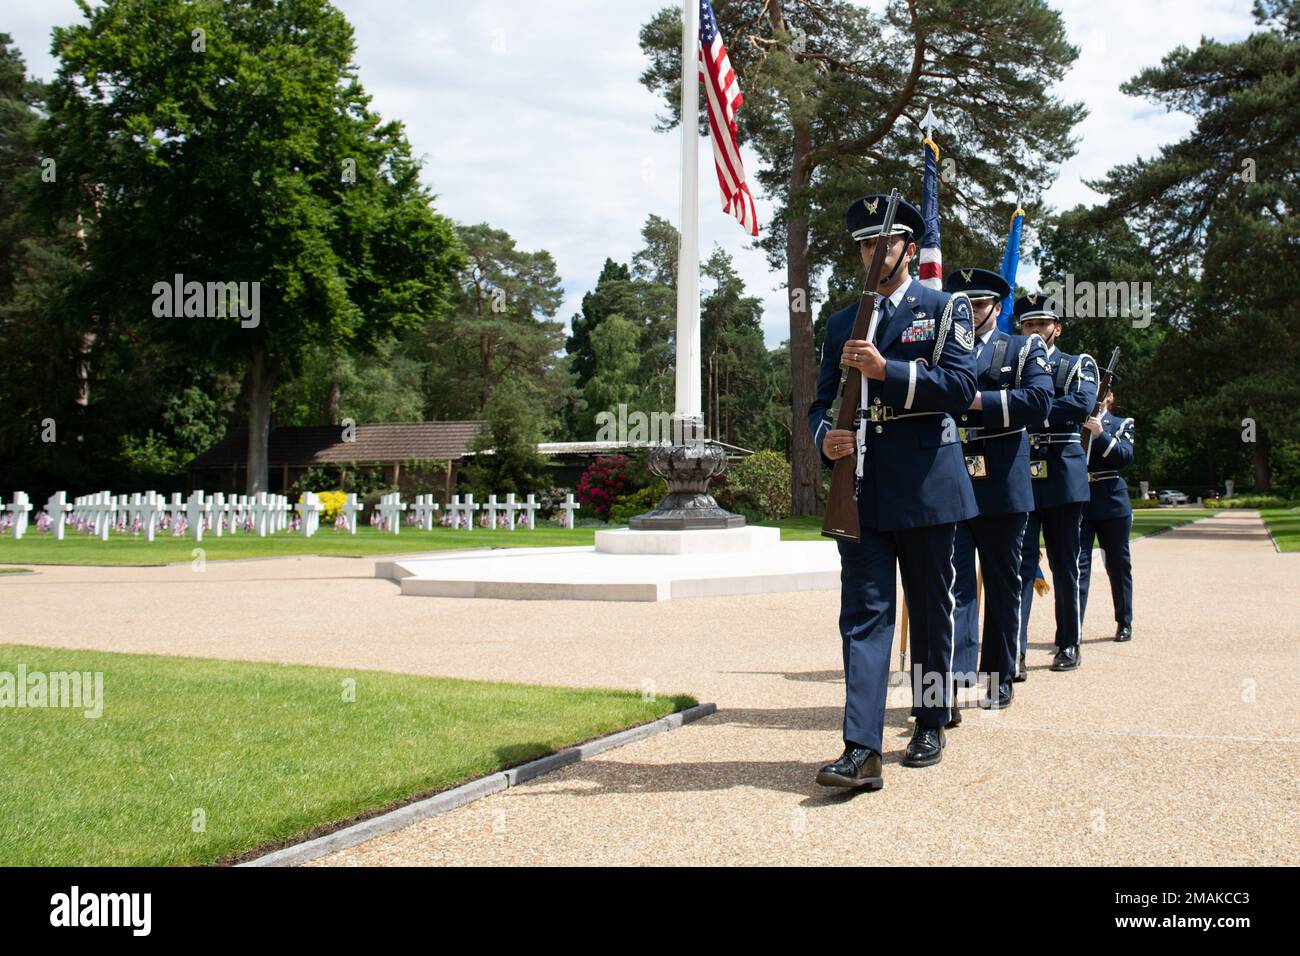 U.S. Air Force Honor Guard from Royal Air Force Croughton prepares to present the colors during a Memorial Day ceremony at the Brookwood American Military Cemetery, England, May 29, 2022. Memorial Day provides us a solemn opportunity to remember our fallen brothers and sisters in arms, reflect upon their courageous sacrifice, and show gratitude for the freedom they gave their lives to defend. It also affords us the opportunity to pay homage to those families who lost their loved ones in service to the Nation-and continue to feel the full weight of that sacrifice today. Stock Photo